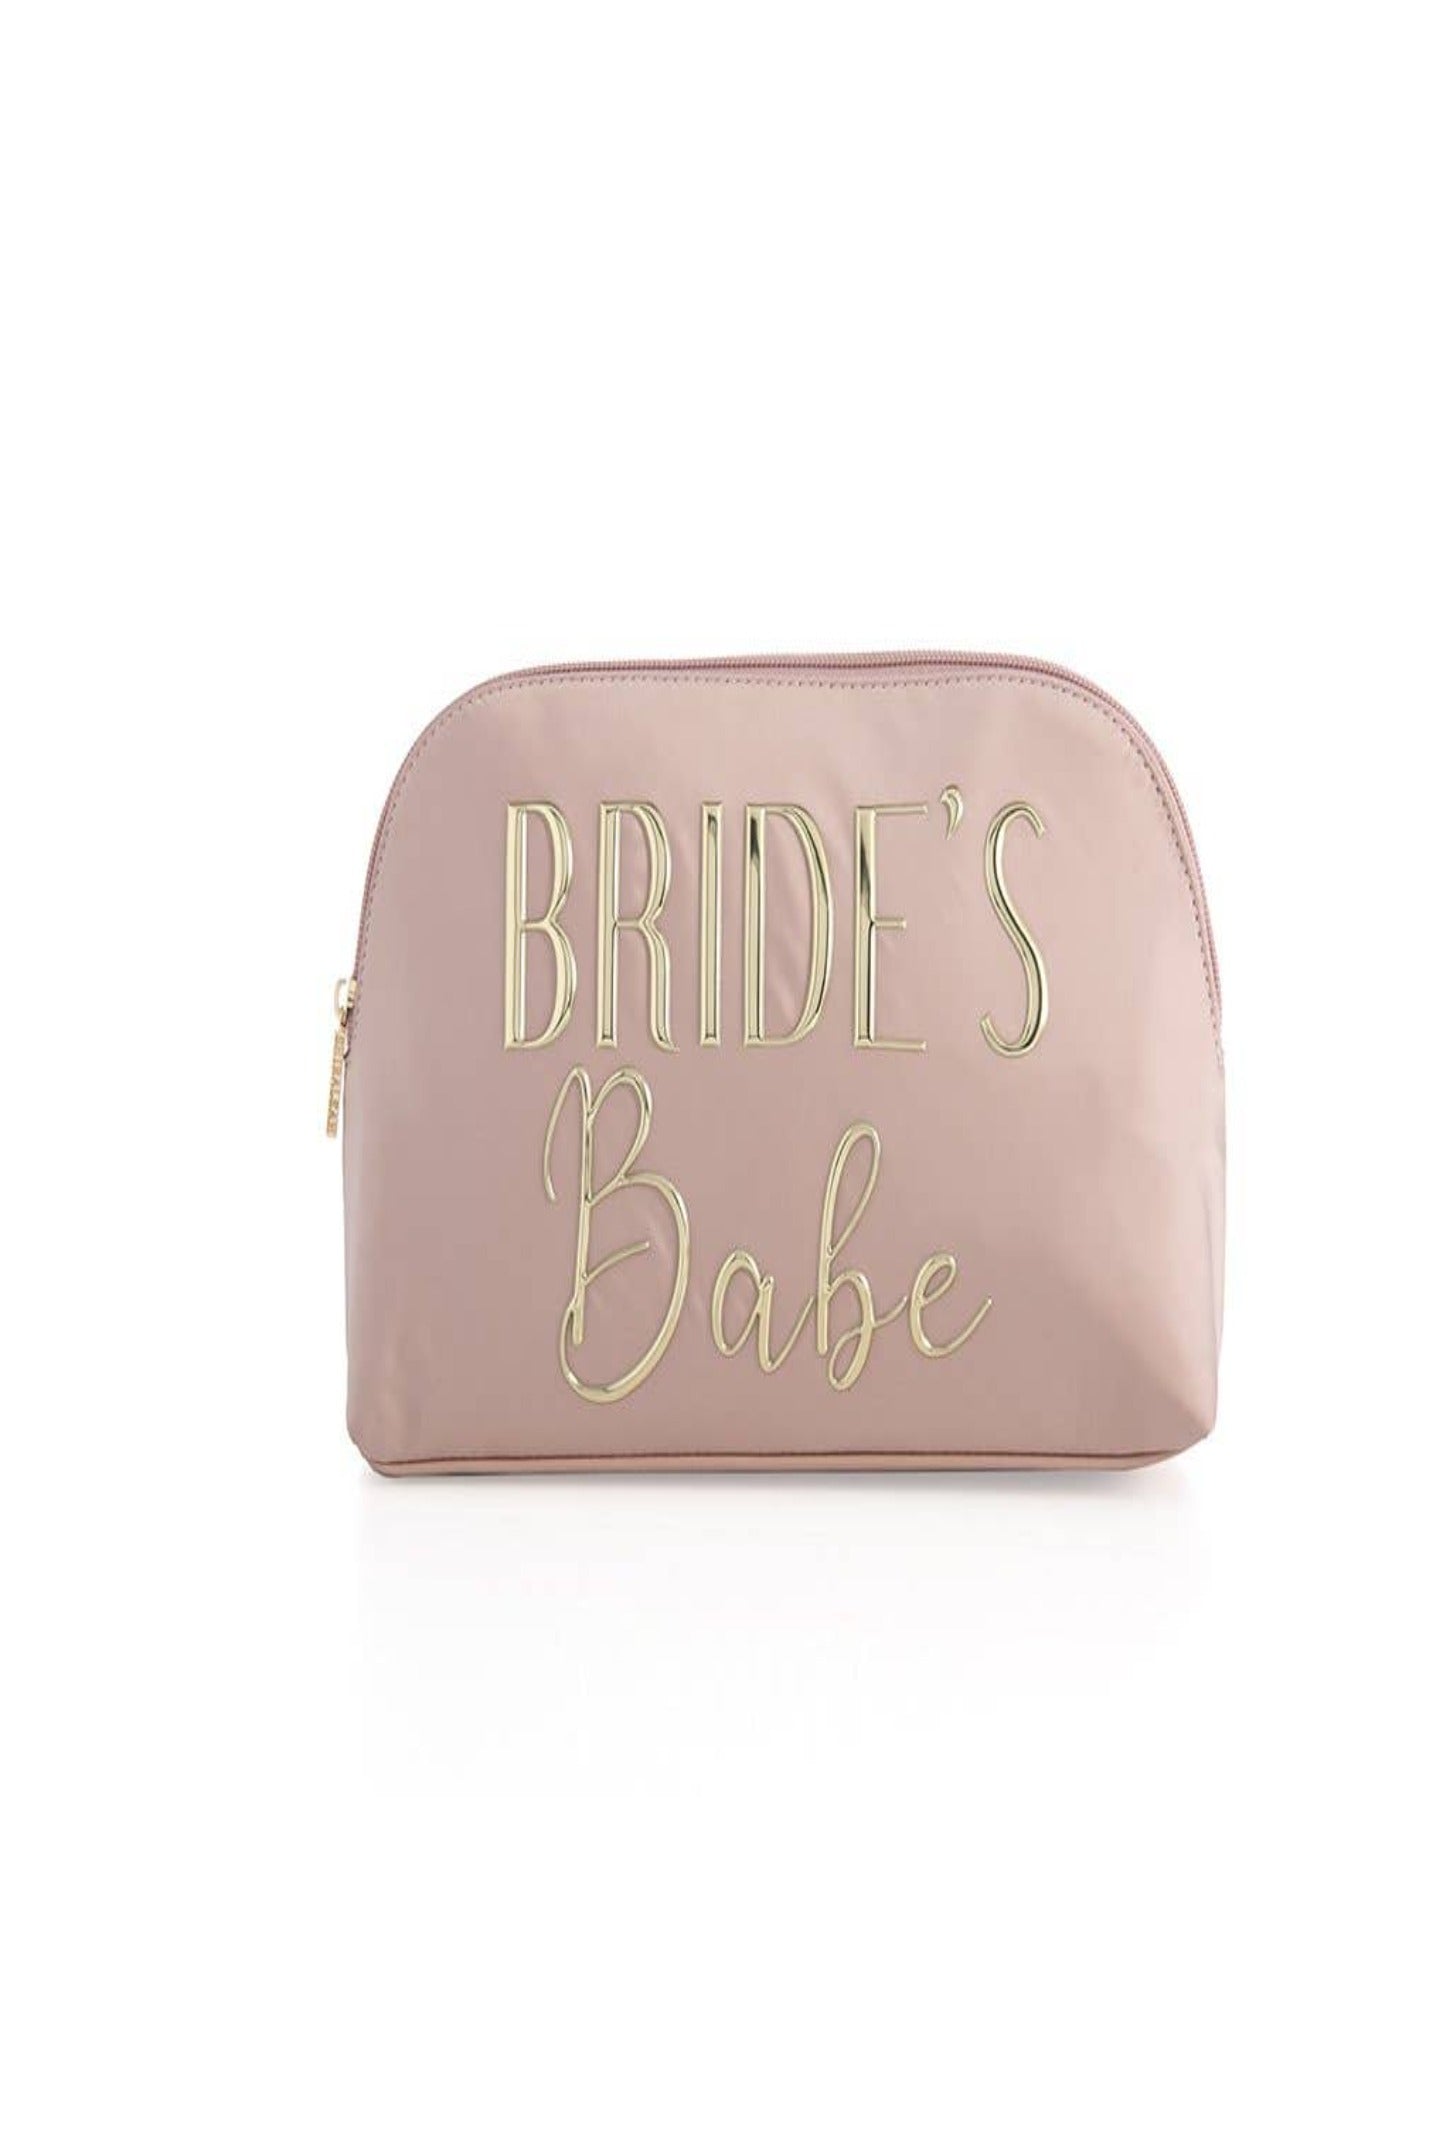 Bride Bags | Bags for the Bride To Be from Team Hen